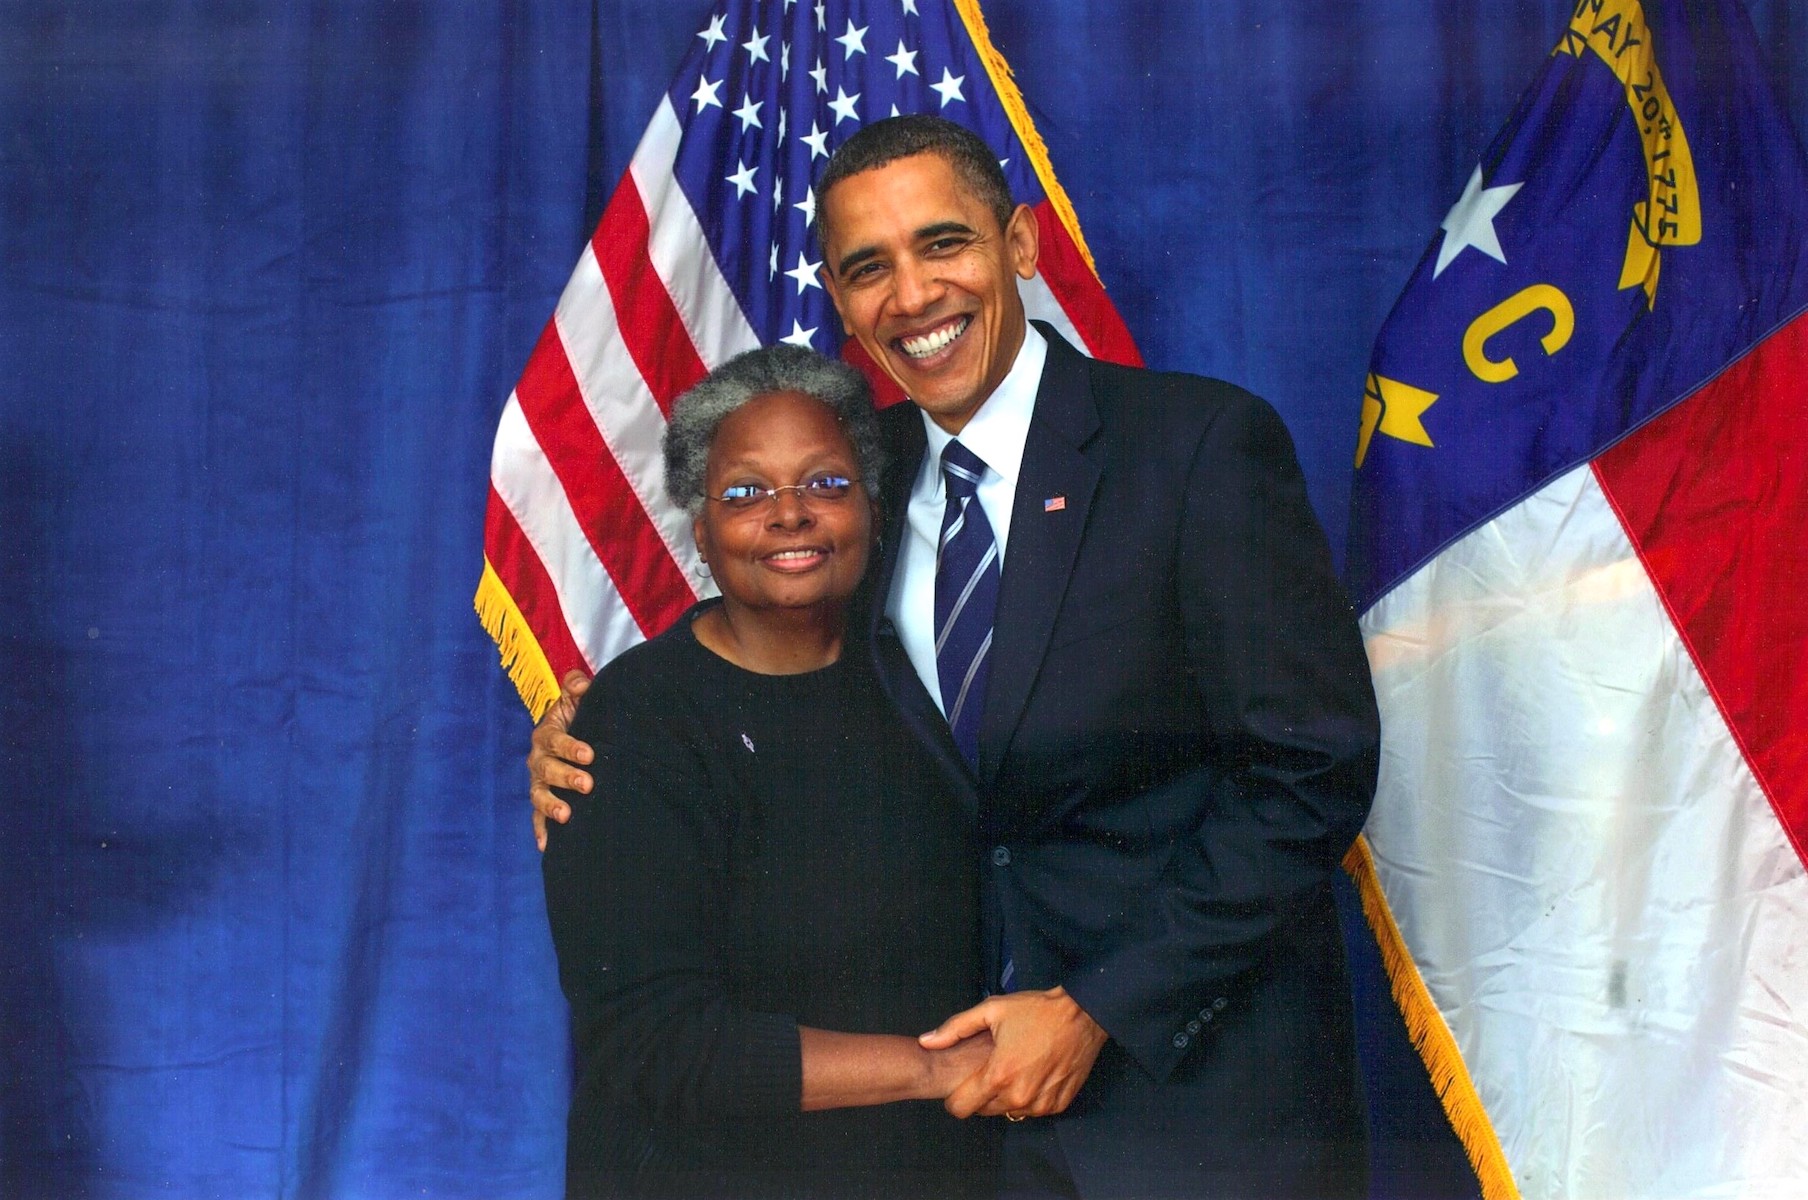 Mandy with President Barack Obama, 2011, North Carolina. Photo Credit: Peter Joseph Souza. Mandy shares: “I was one of the five Obama Pride Co-Chairs for his historic 2008 presidential election win. We organized and mobilized the LGBT vote. I did mine in the South.” Photo courtesy of Mandy Carter.